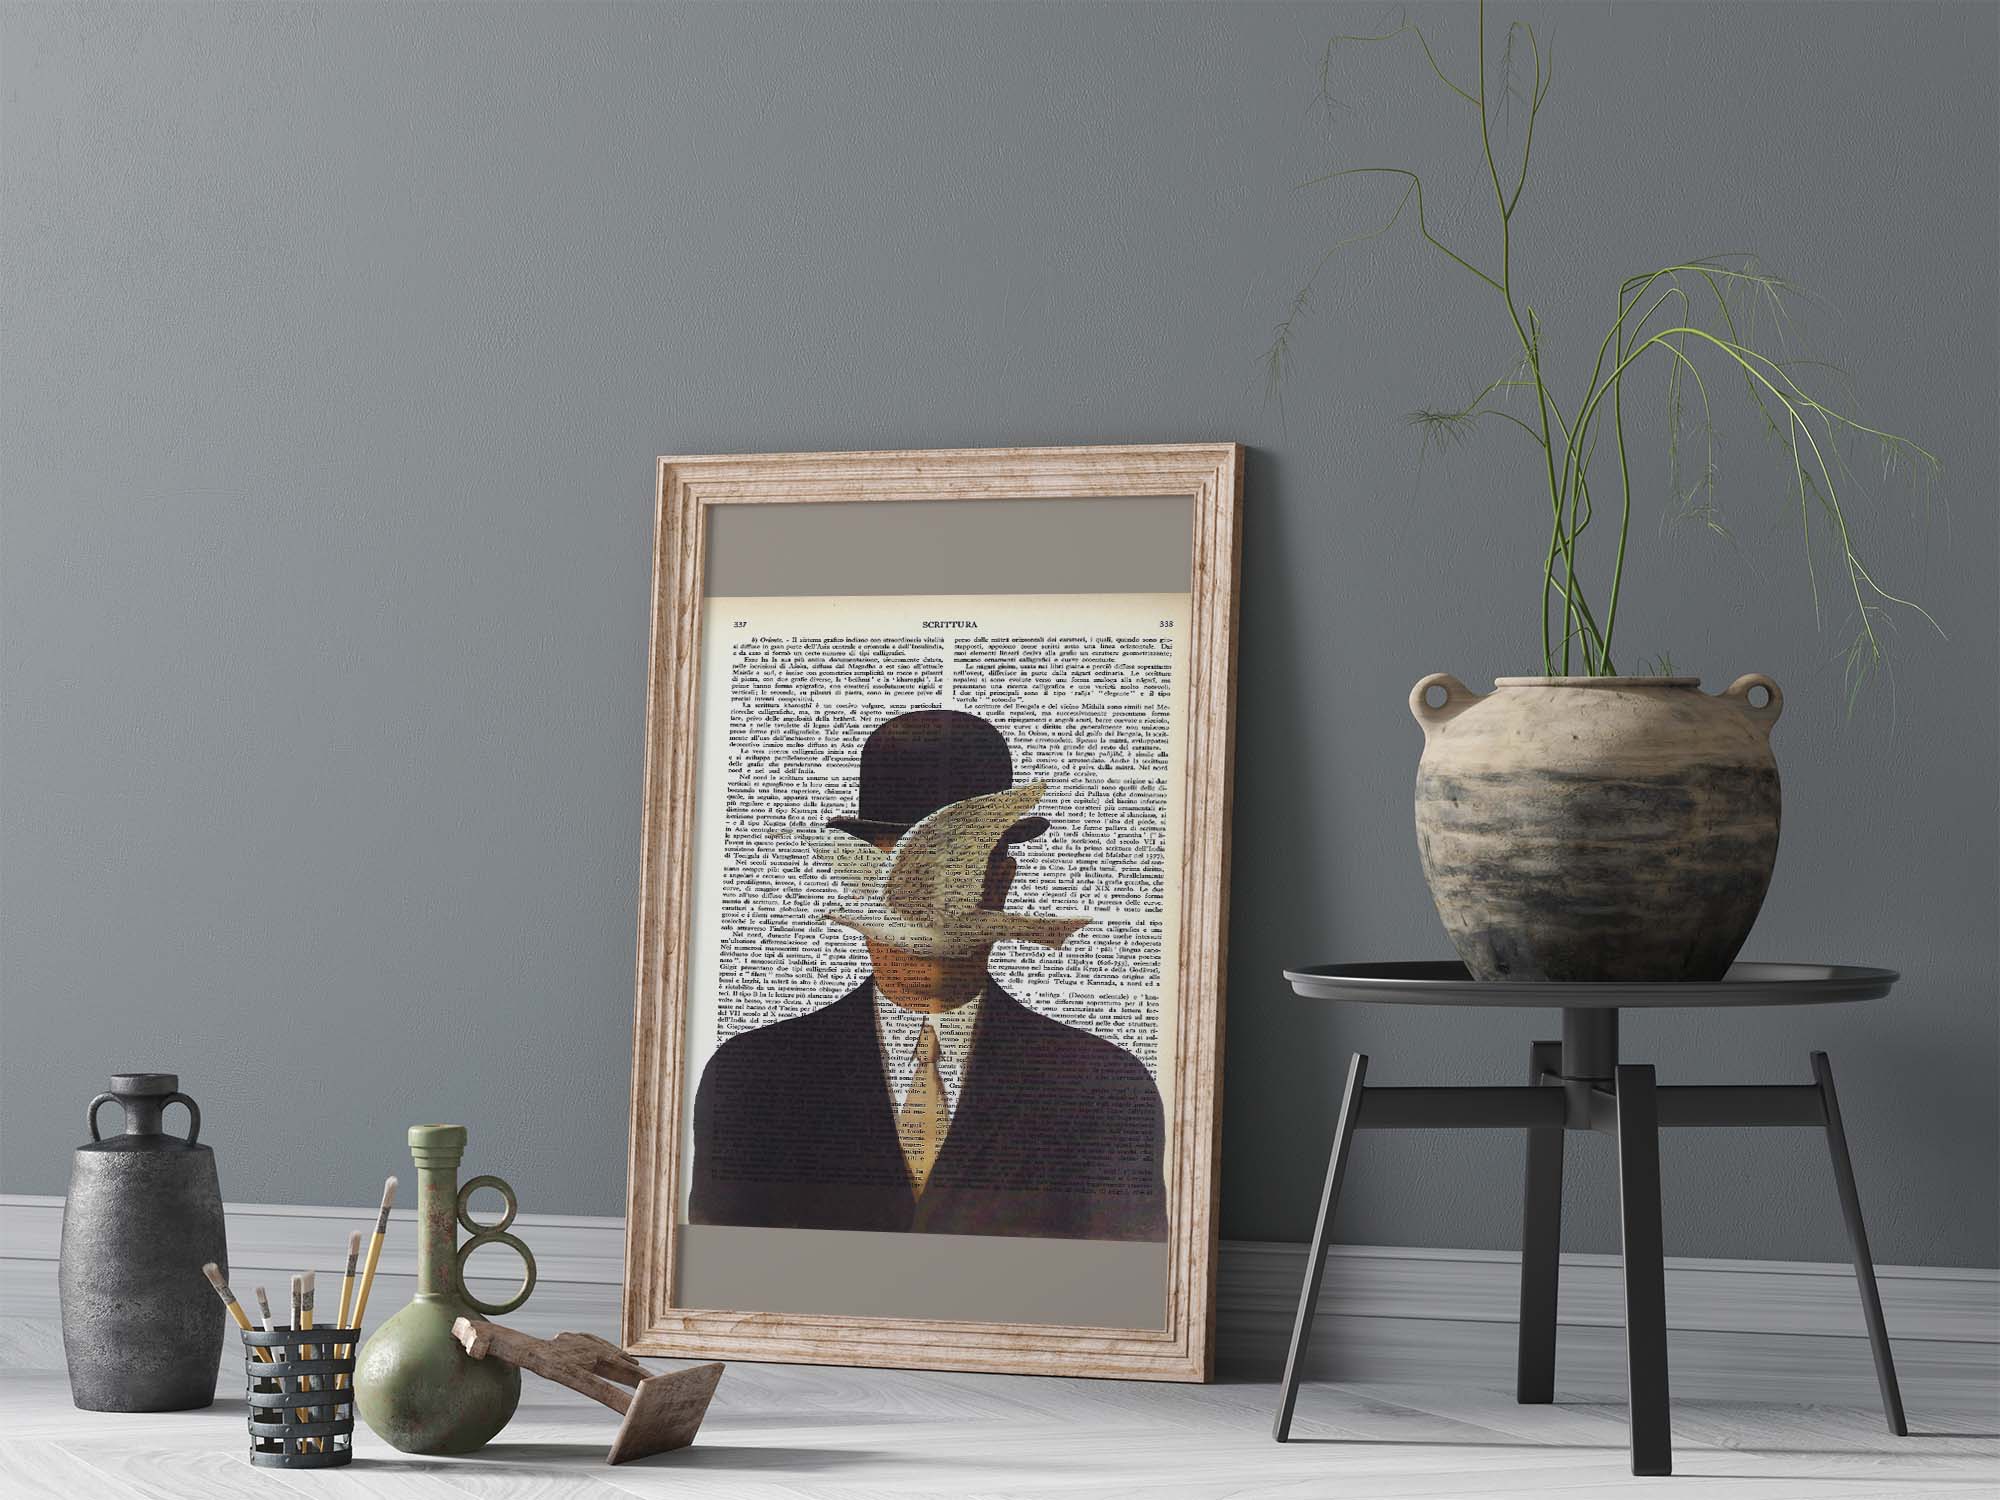 Mix-up: The man in the bowler hat – René Magritte